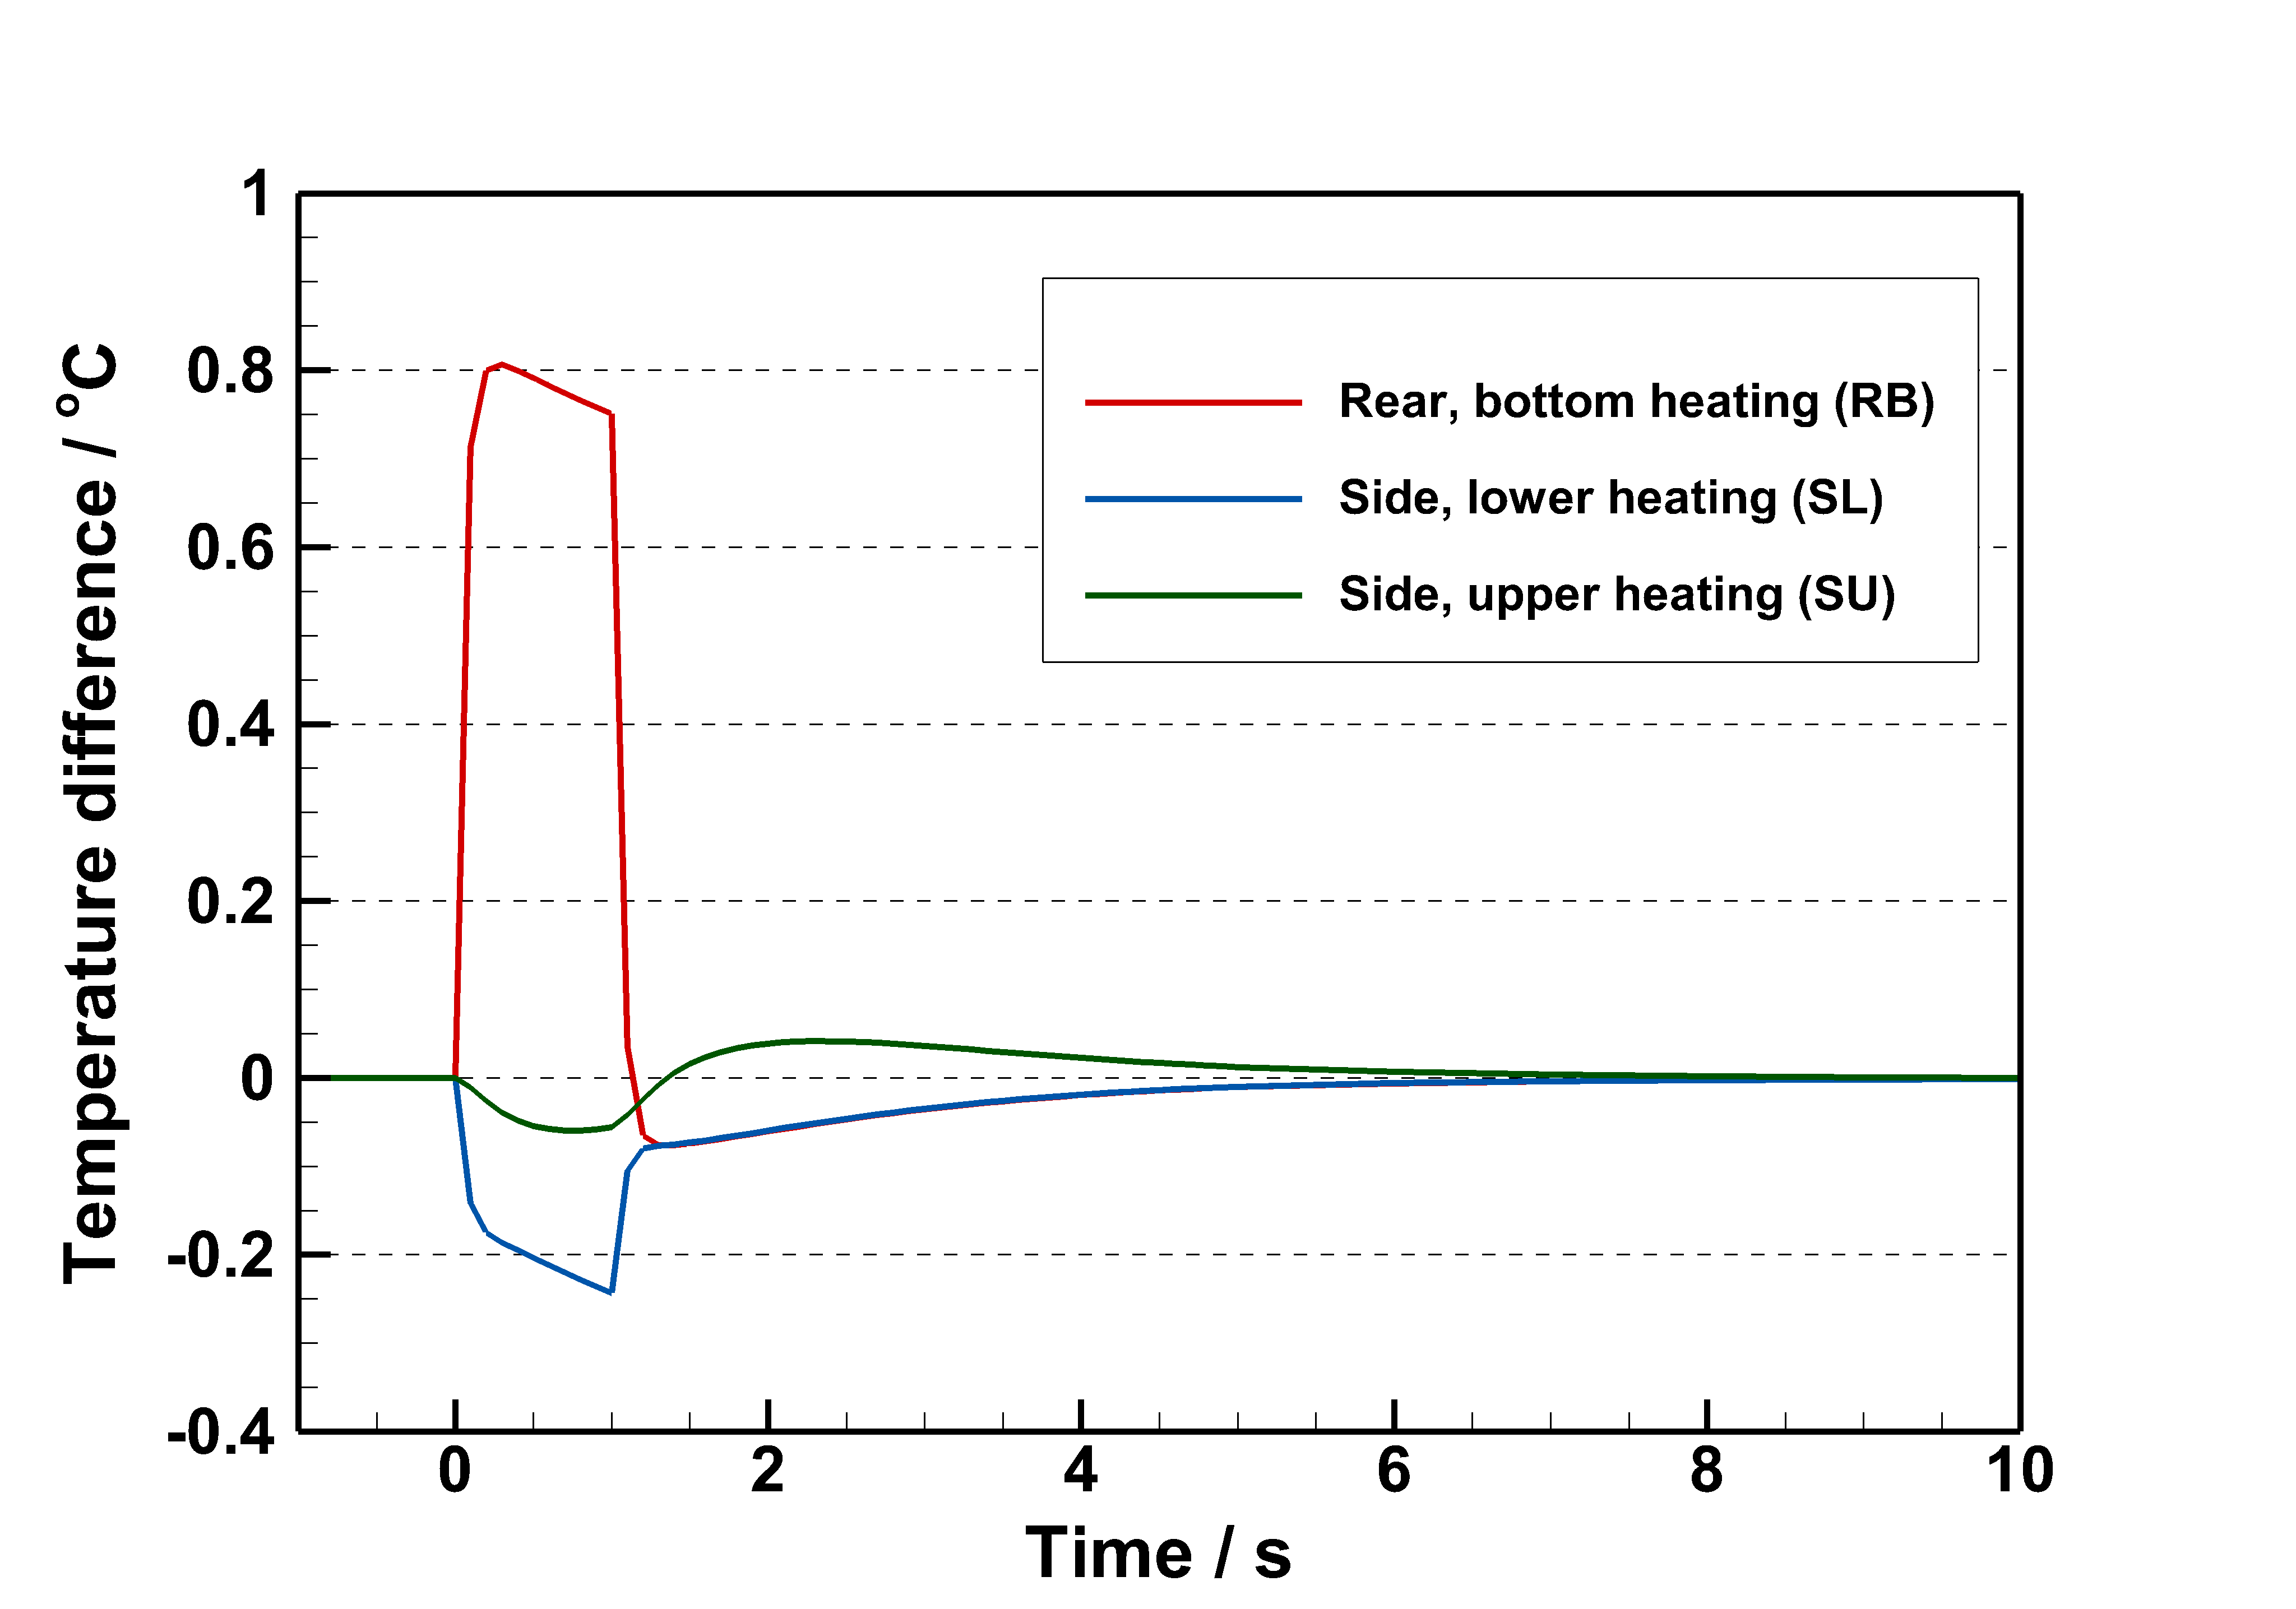 Variations in the temperature difference between the frame of the detector and the reference thermometer at different heating locations when a heating rate of 3 W was applied for 1 s